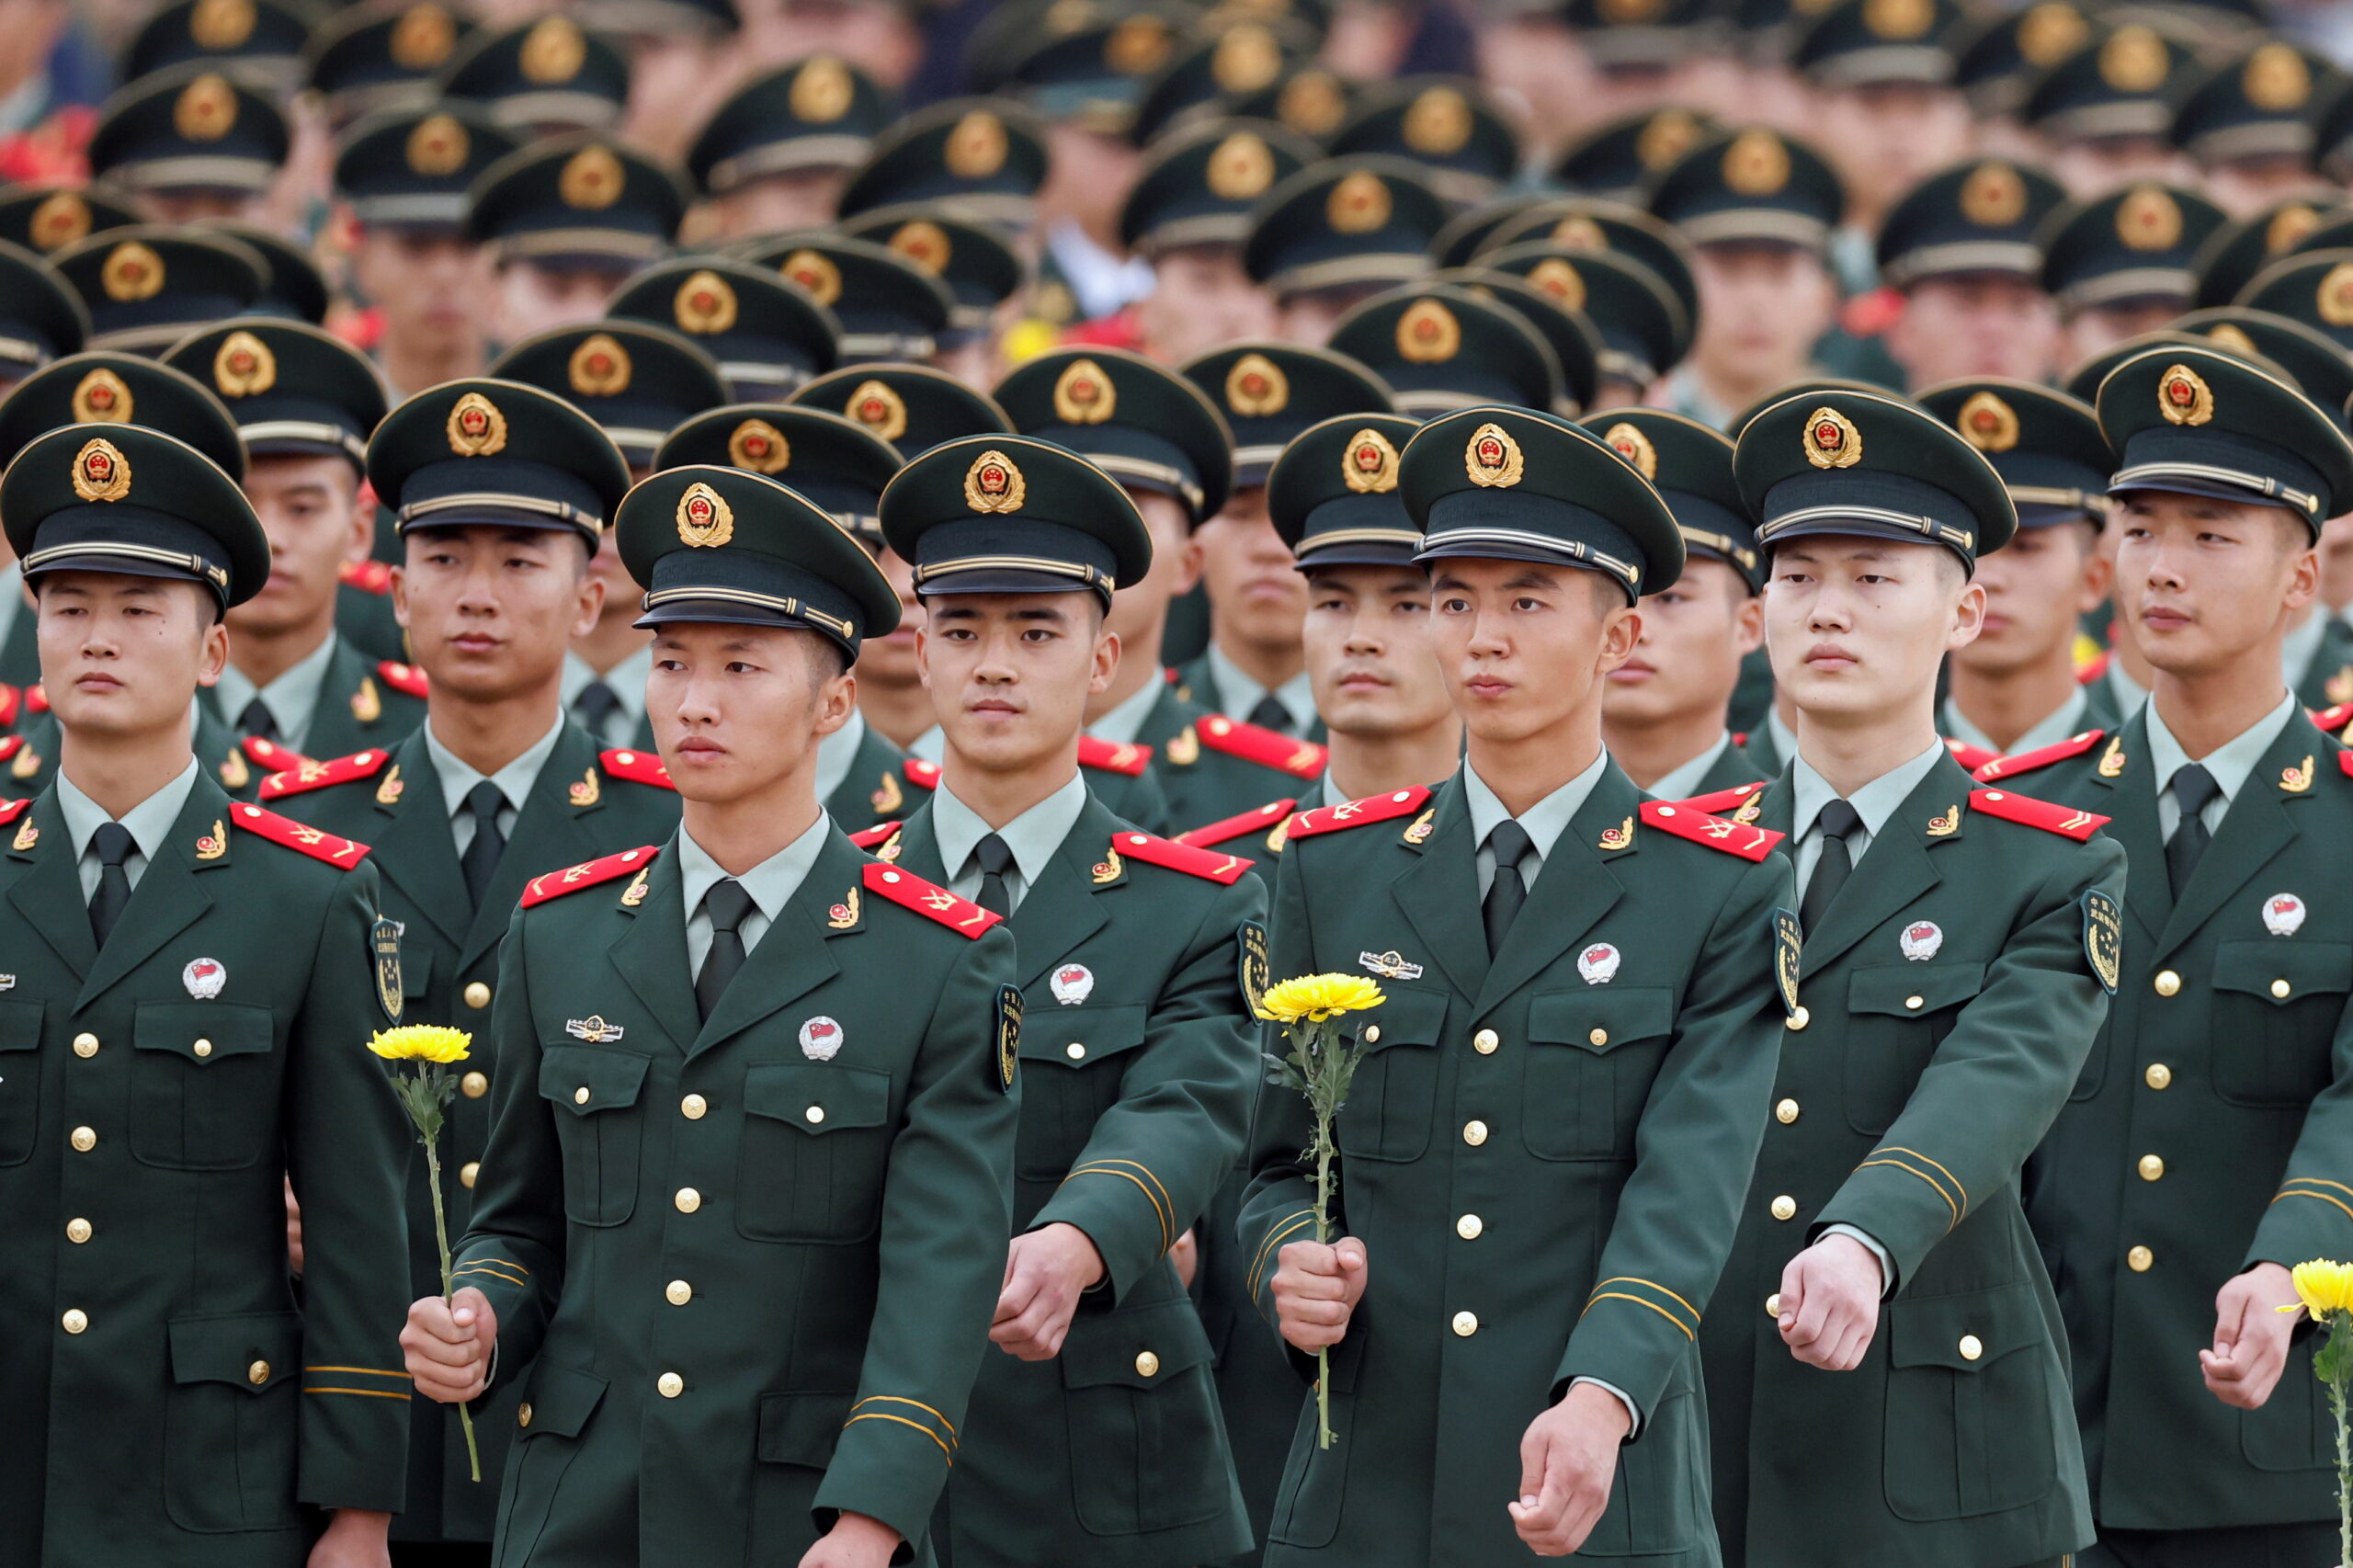 The platform will harness breakthrough technologies for China's military advancements. Pictured are members of China's People's Liberation Army